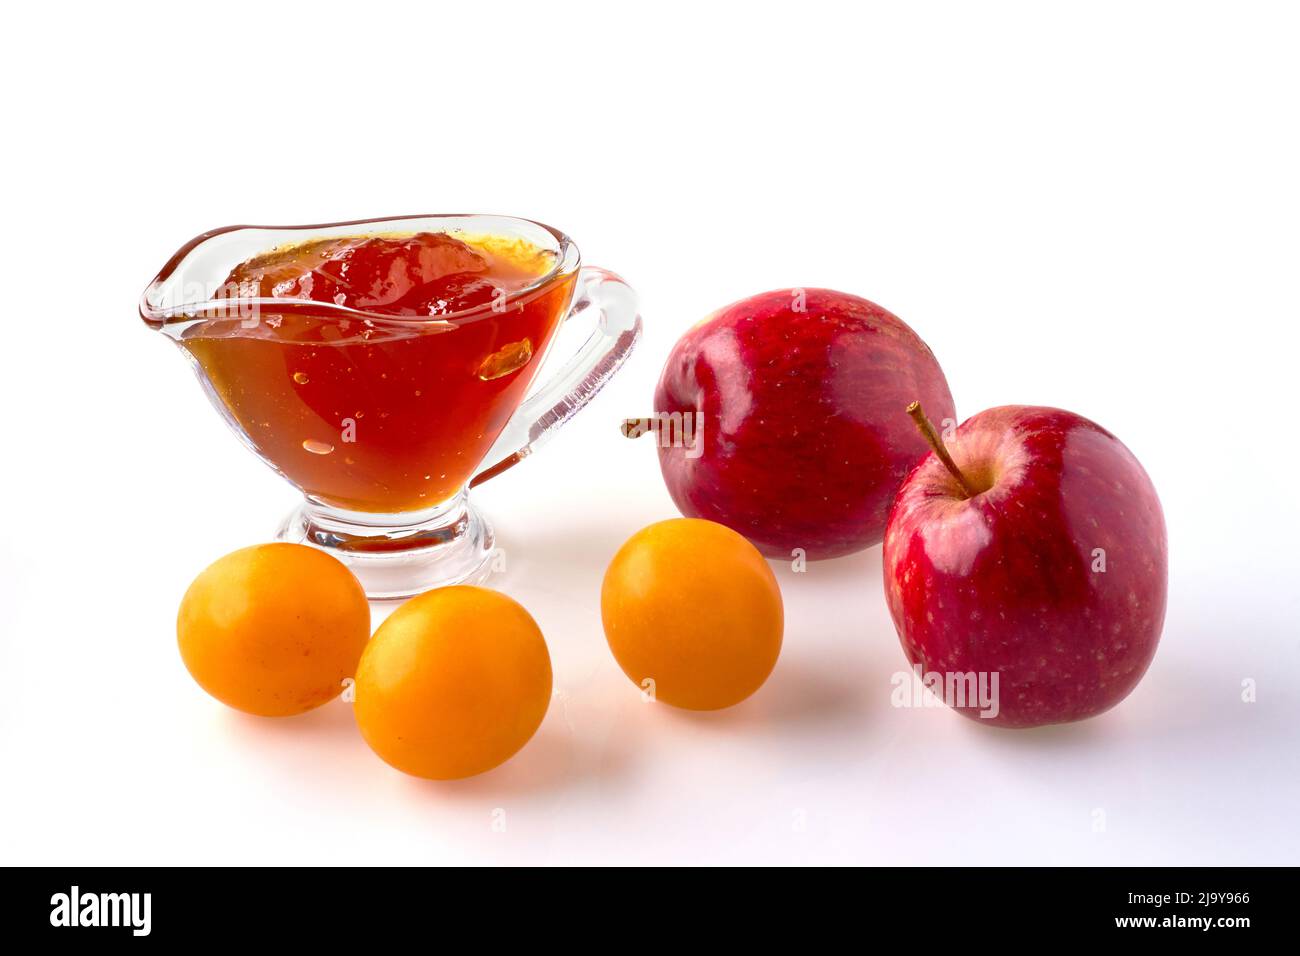 Red cherry plum apples and fruit jam in a glass gravy boat isolated on a white background Stock Photo